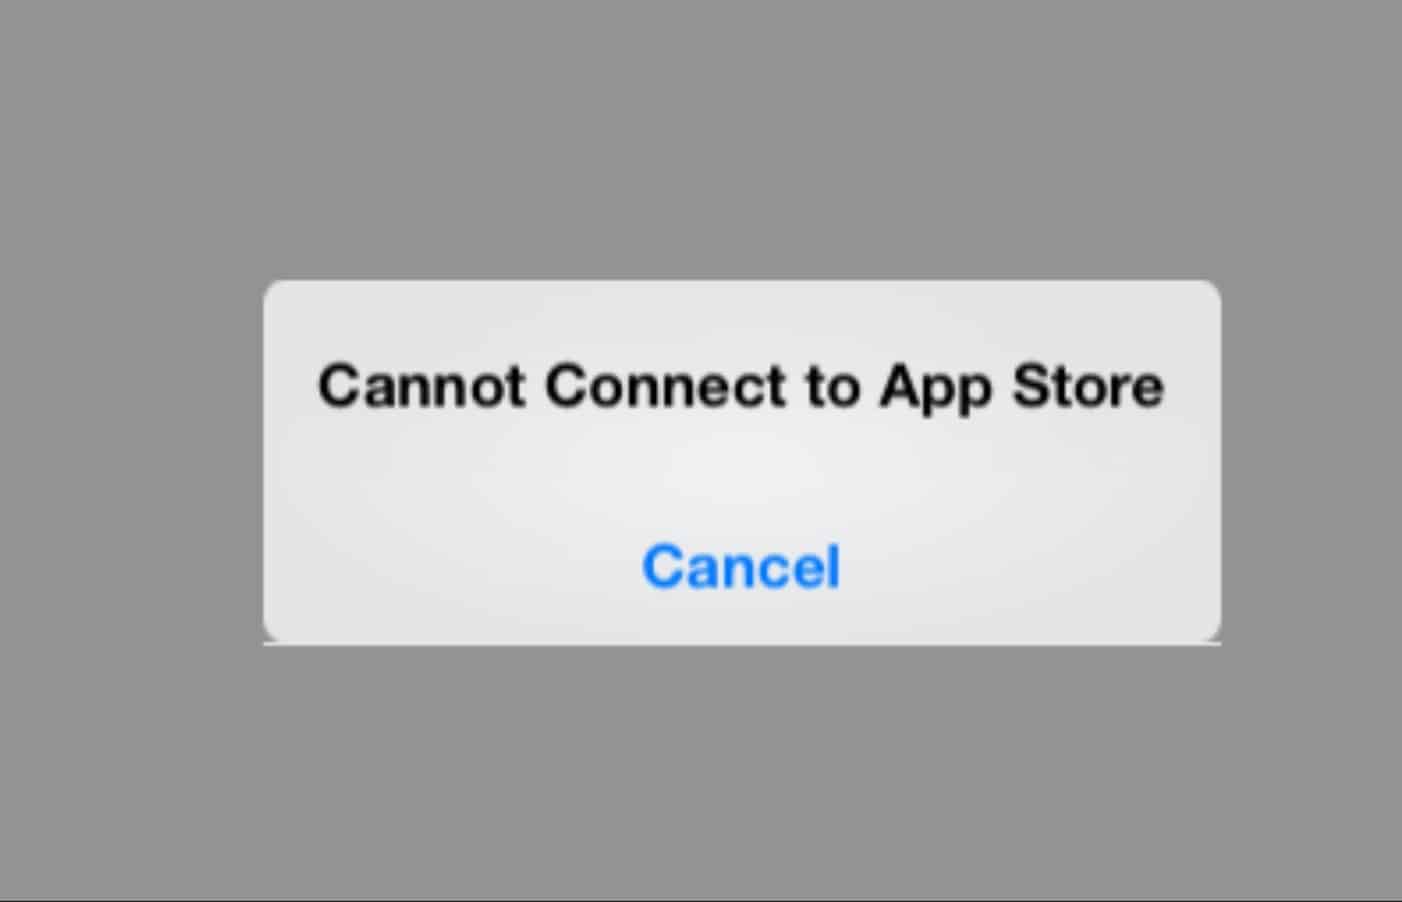 Connect store to unable app Cannot Connect